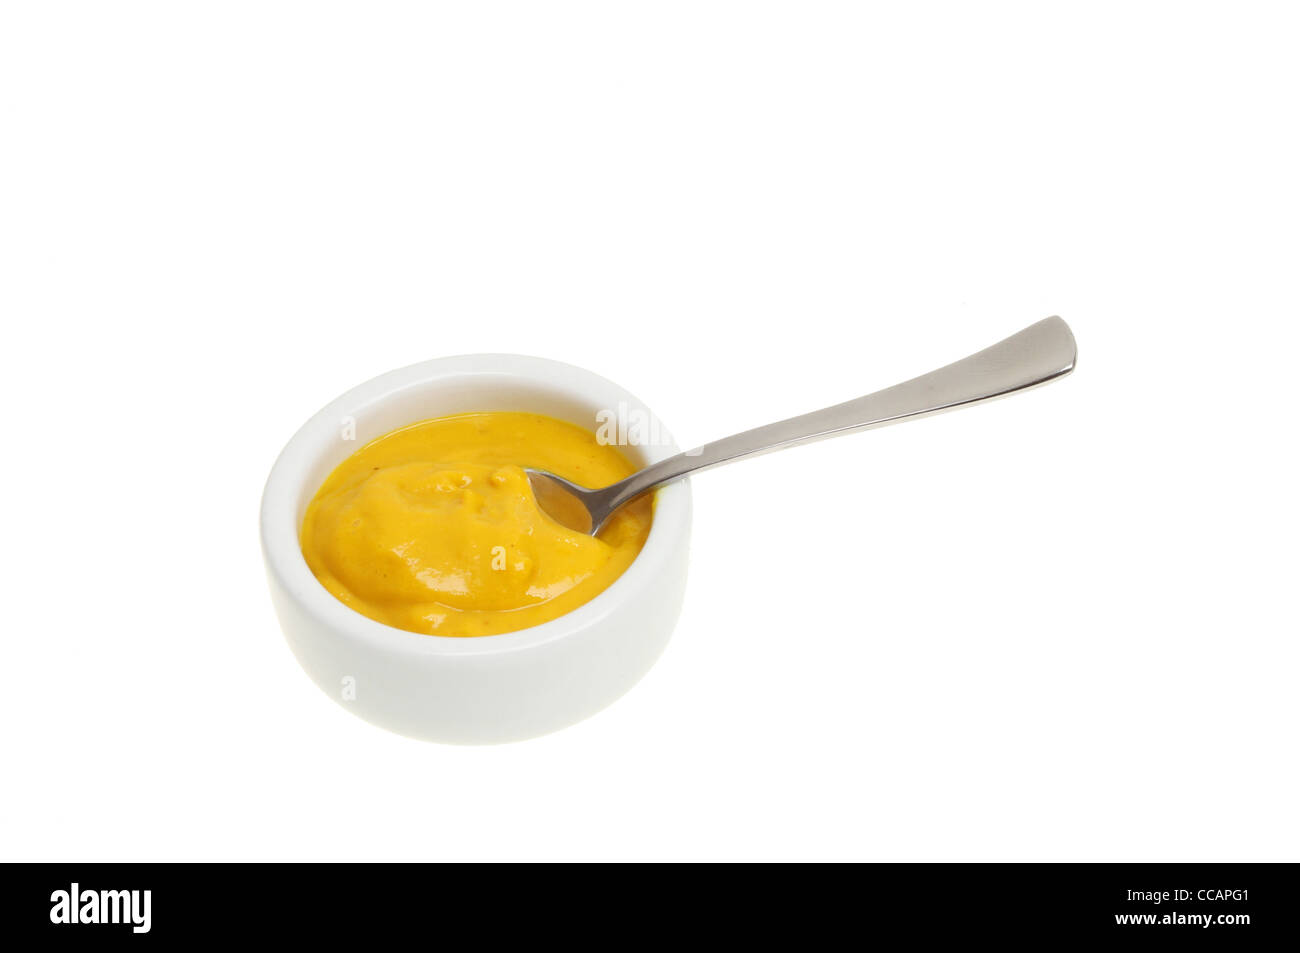 English mustard in a ramekin with a spoon isolated against white Stock Photo